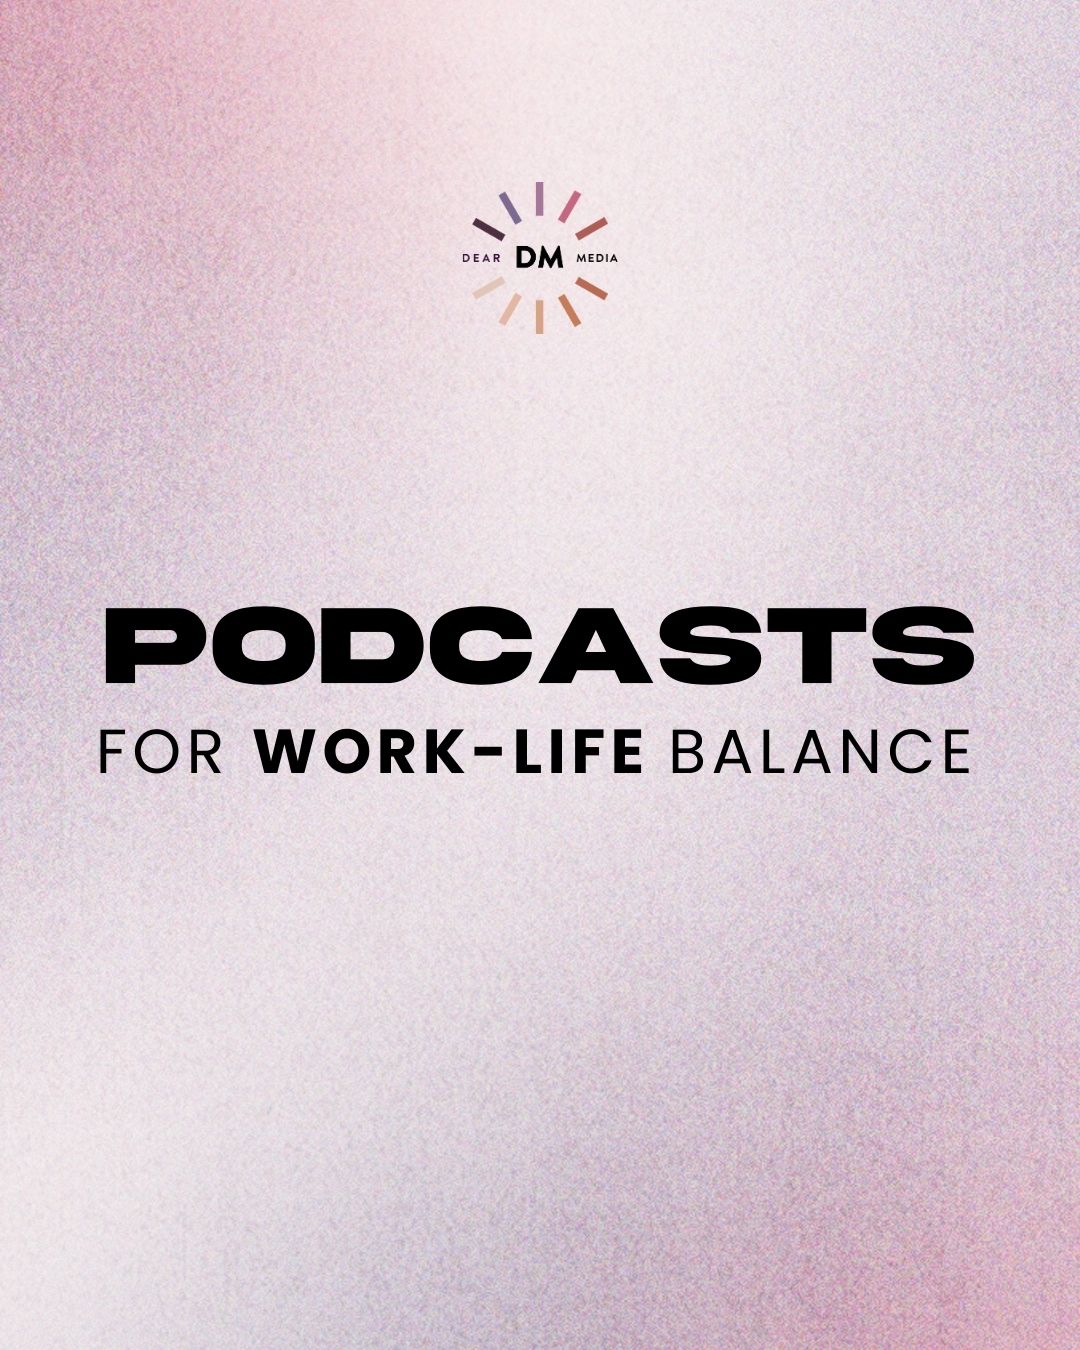 Podcasts for work life balance in bold over a pink background